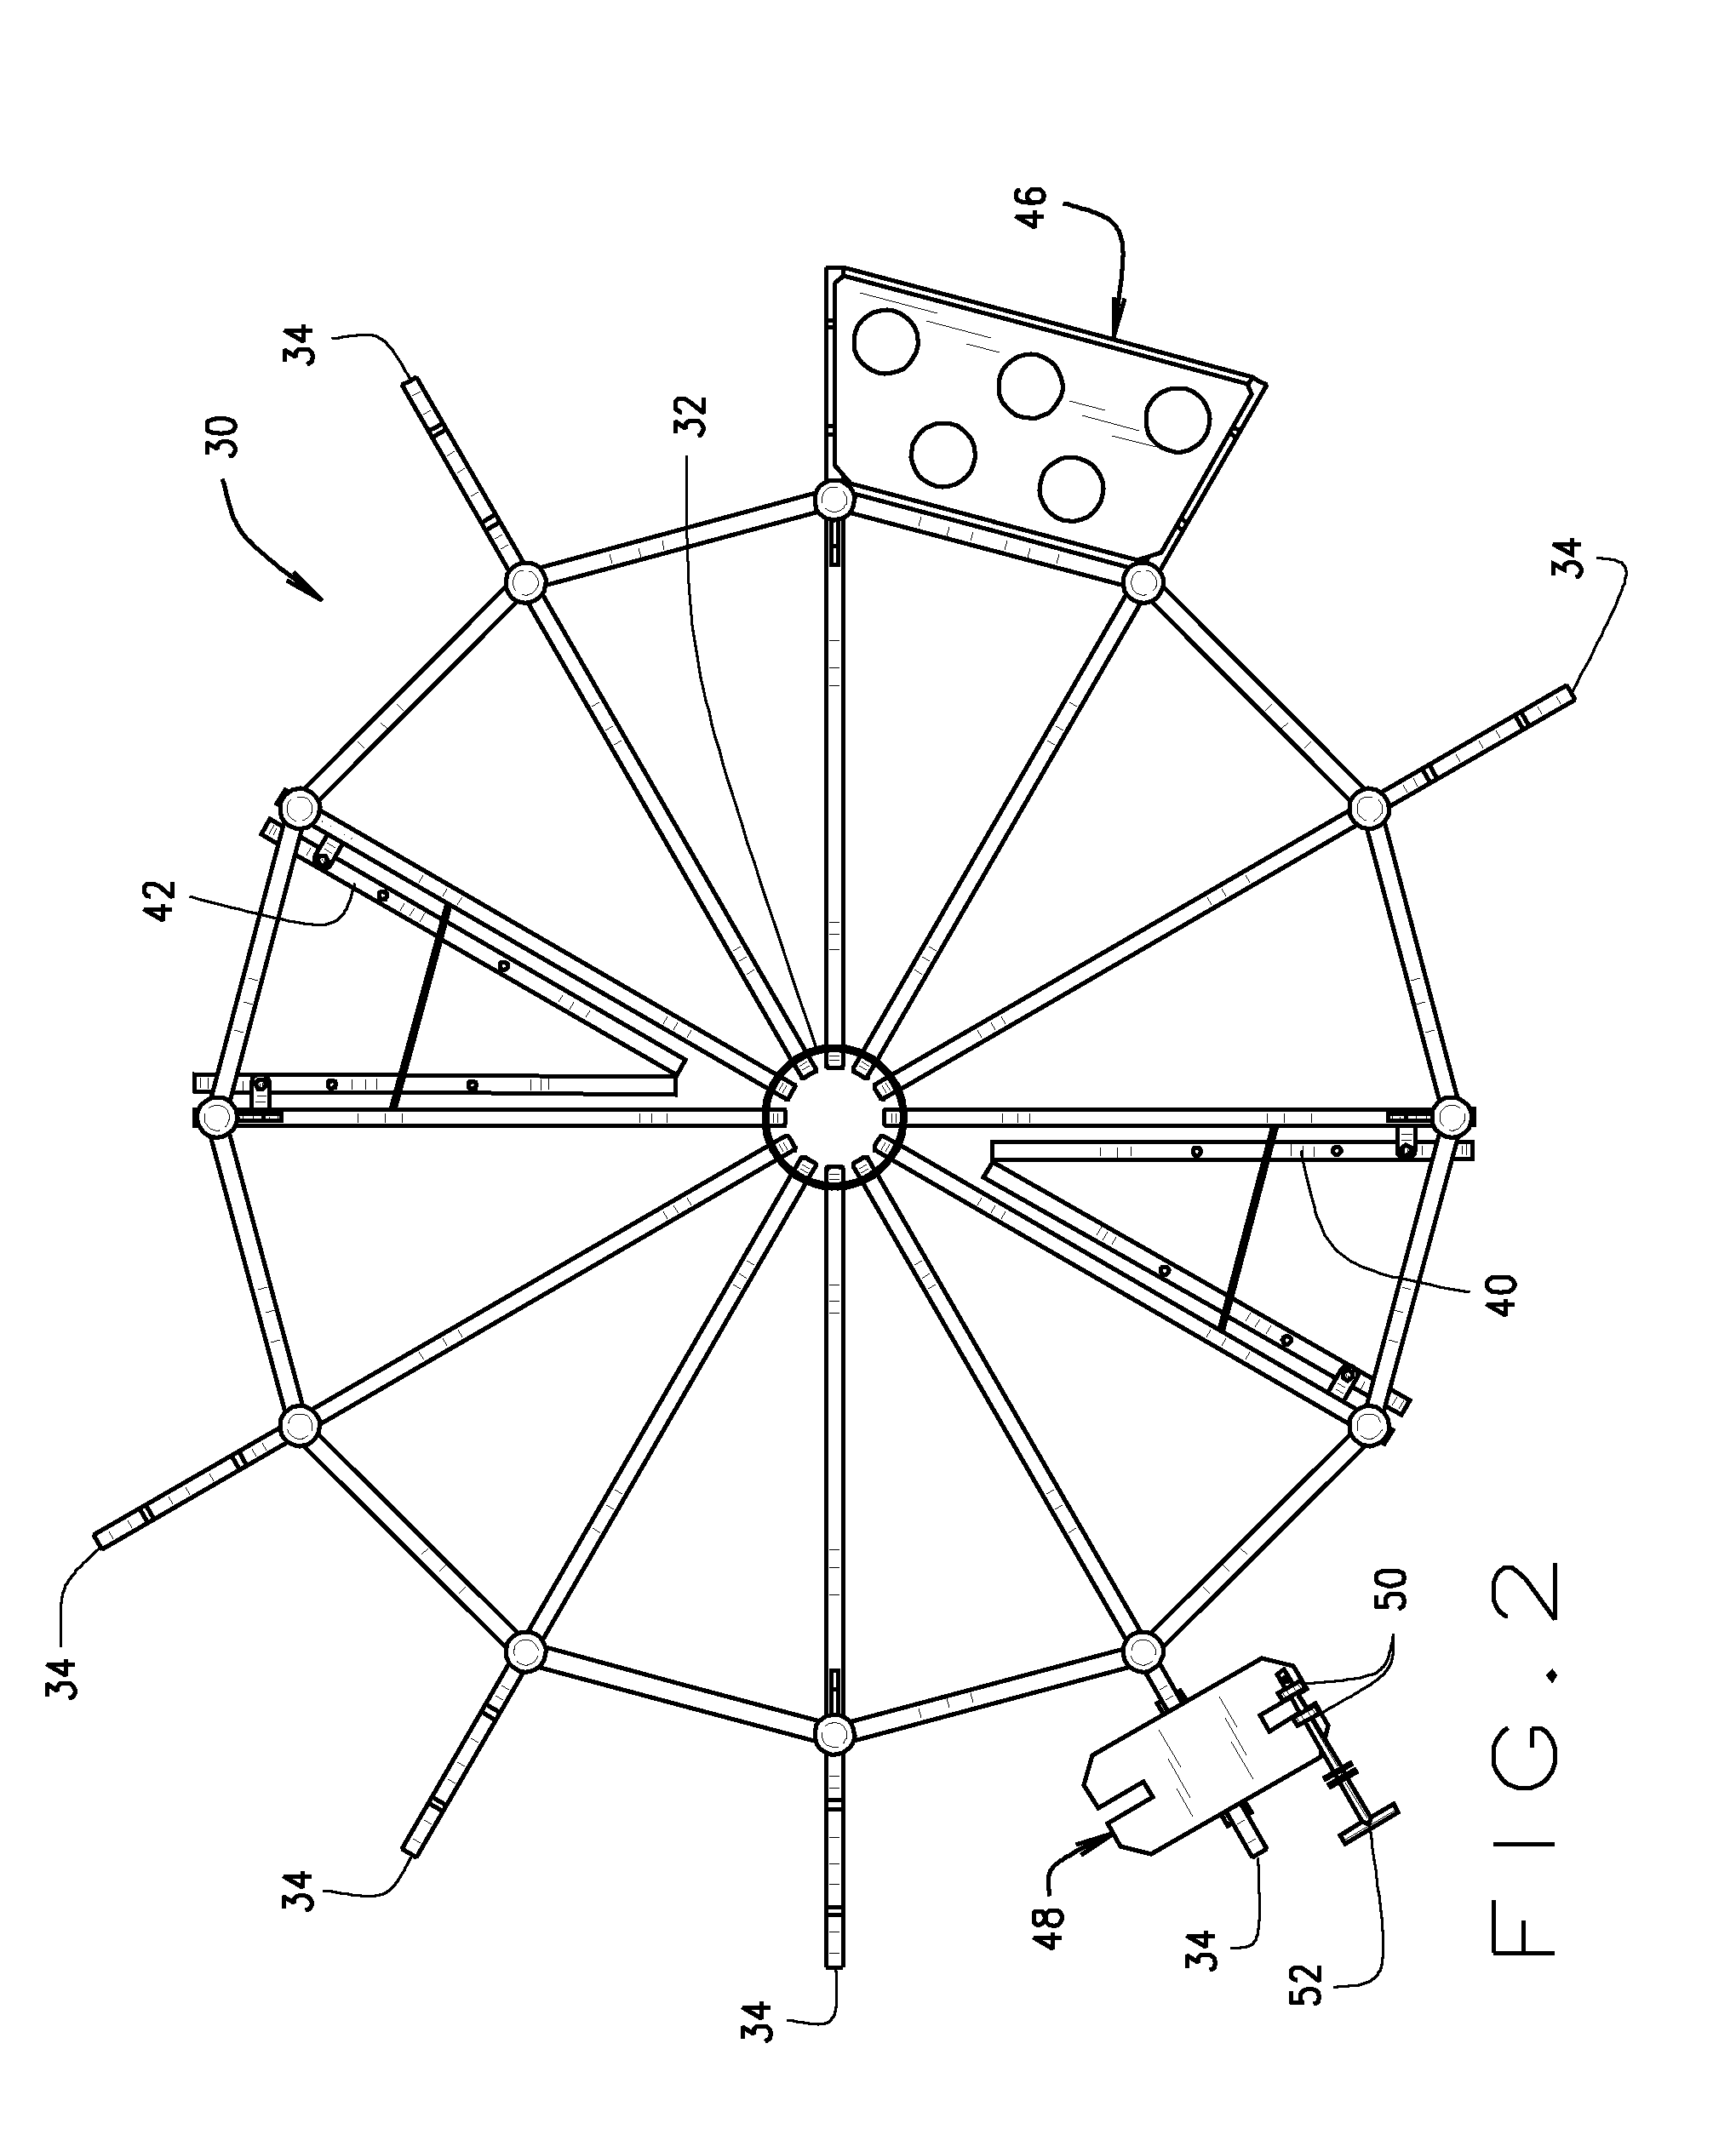 Universal method and apparatus for deploying flying leads